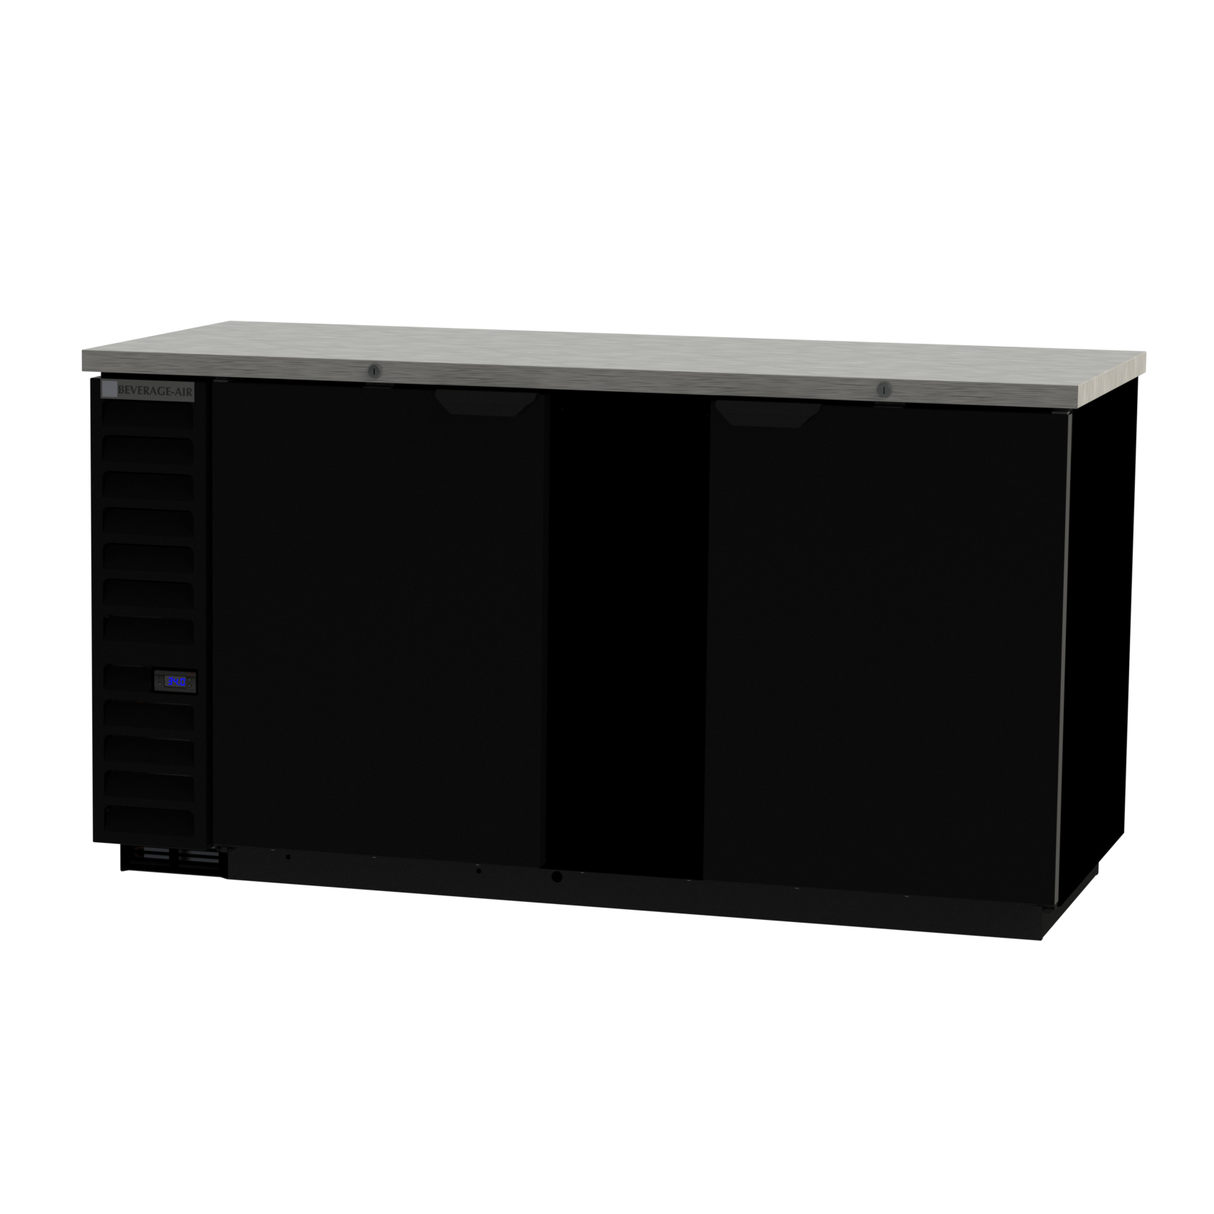 Beverage Air Back Bar Refrigerated Cabinet BB68HC-1-B features epoxy coated steel shelves and solid doors.